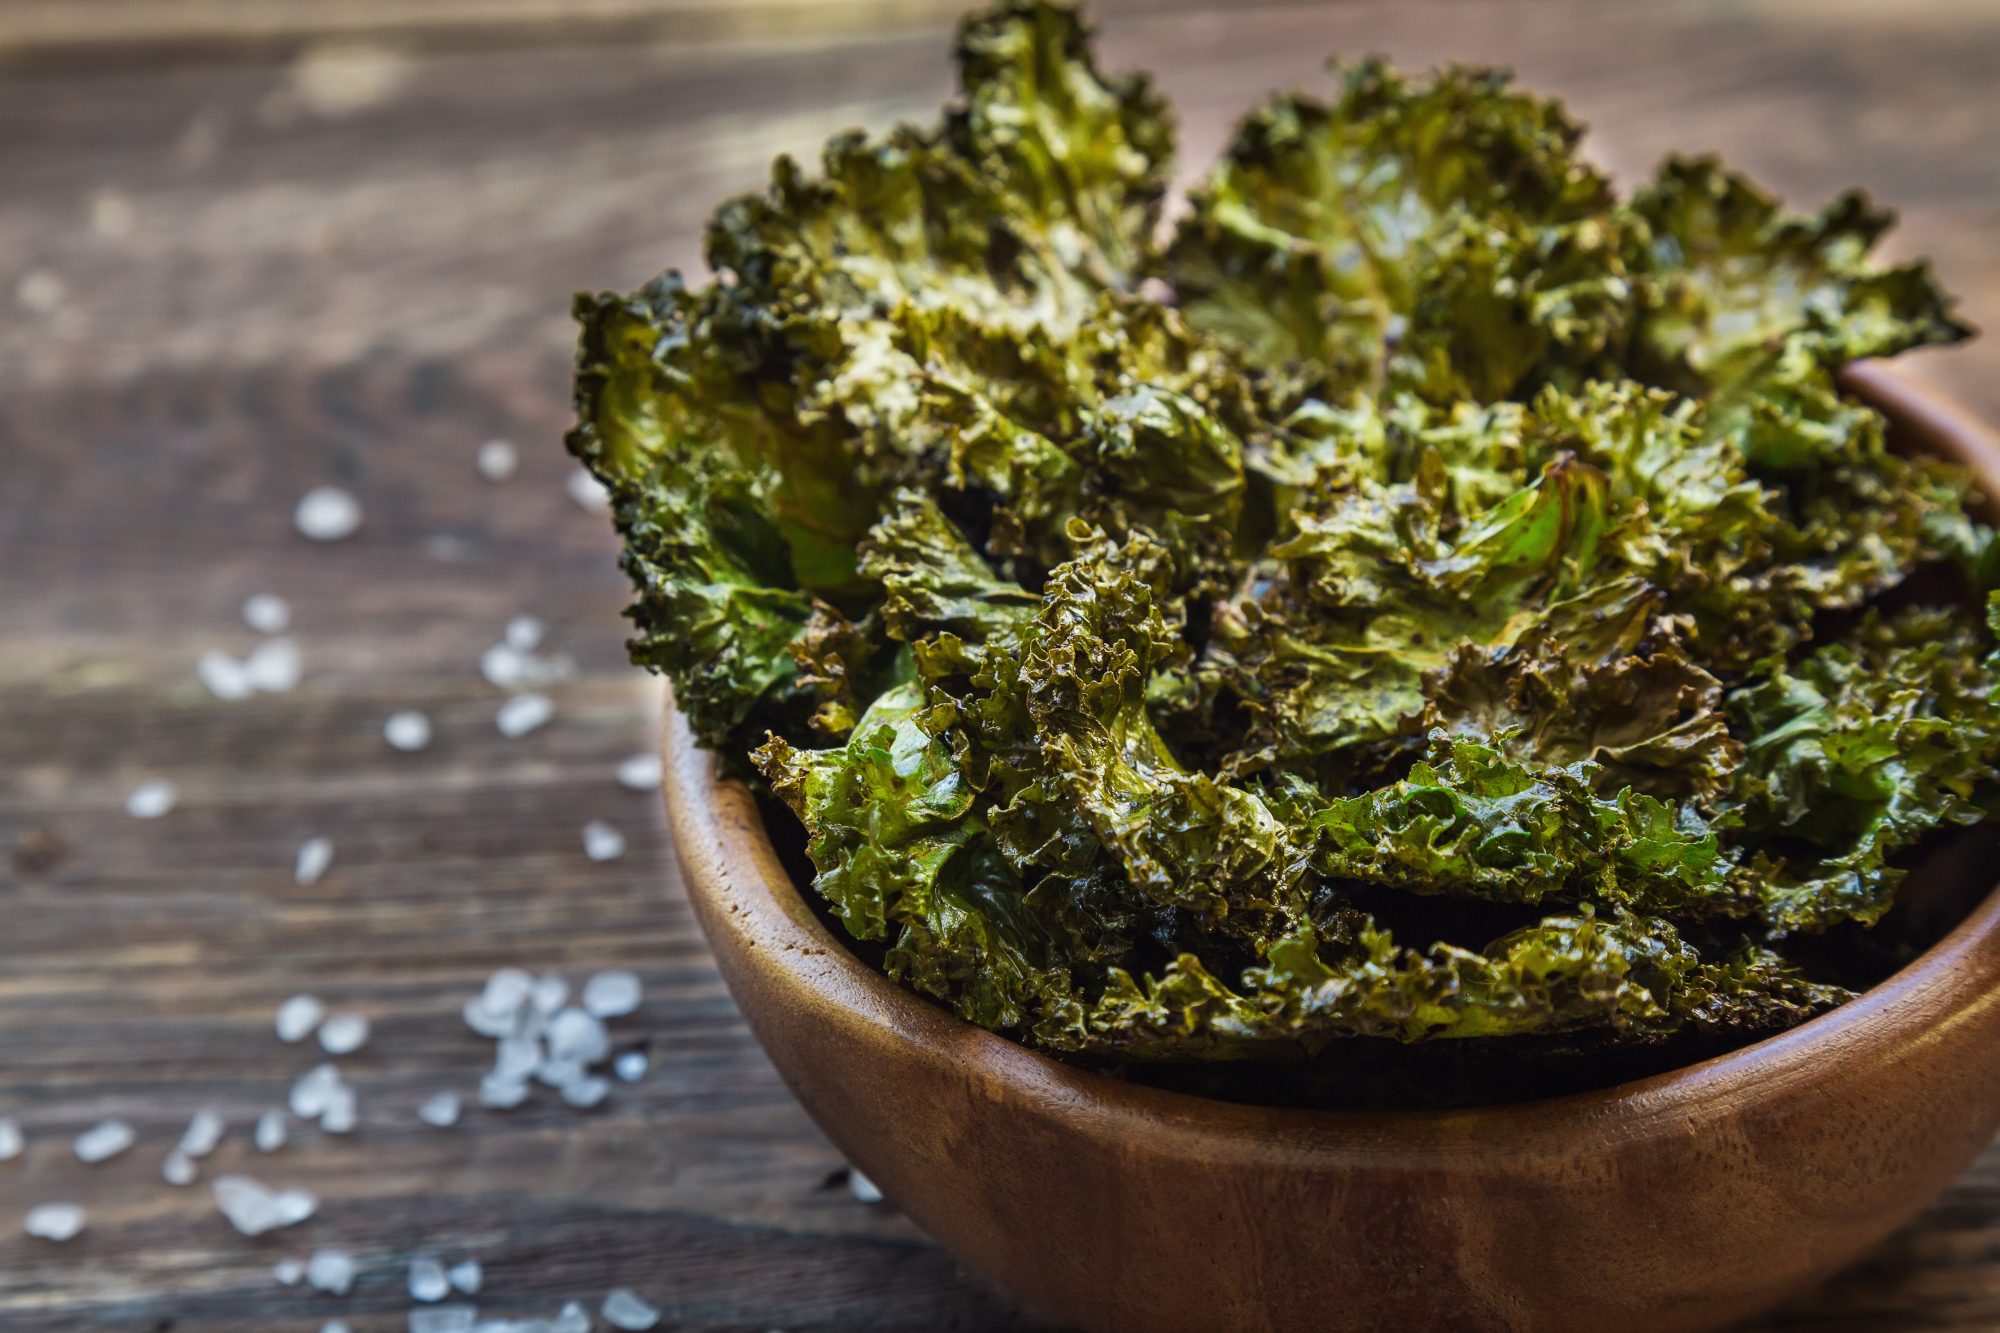 Toaster Oven Kale Chips